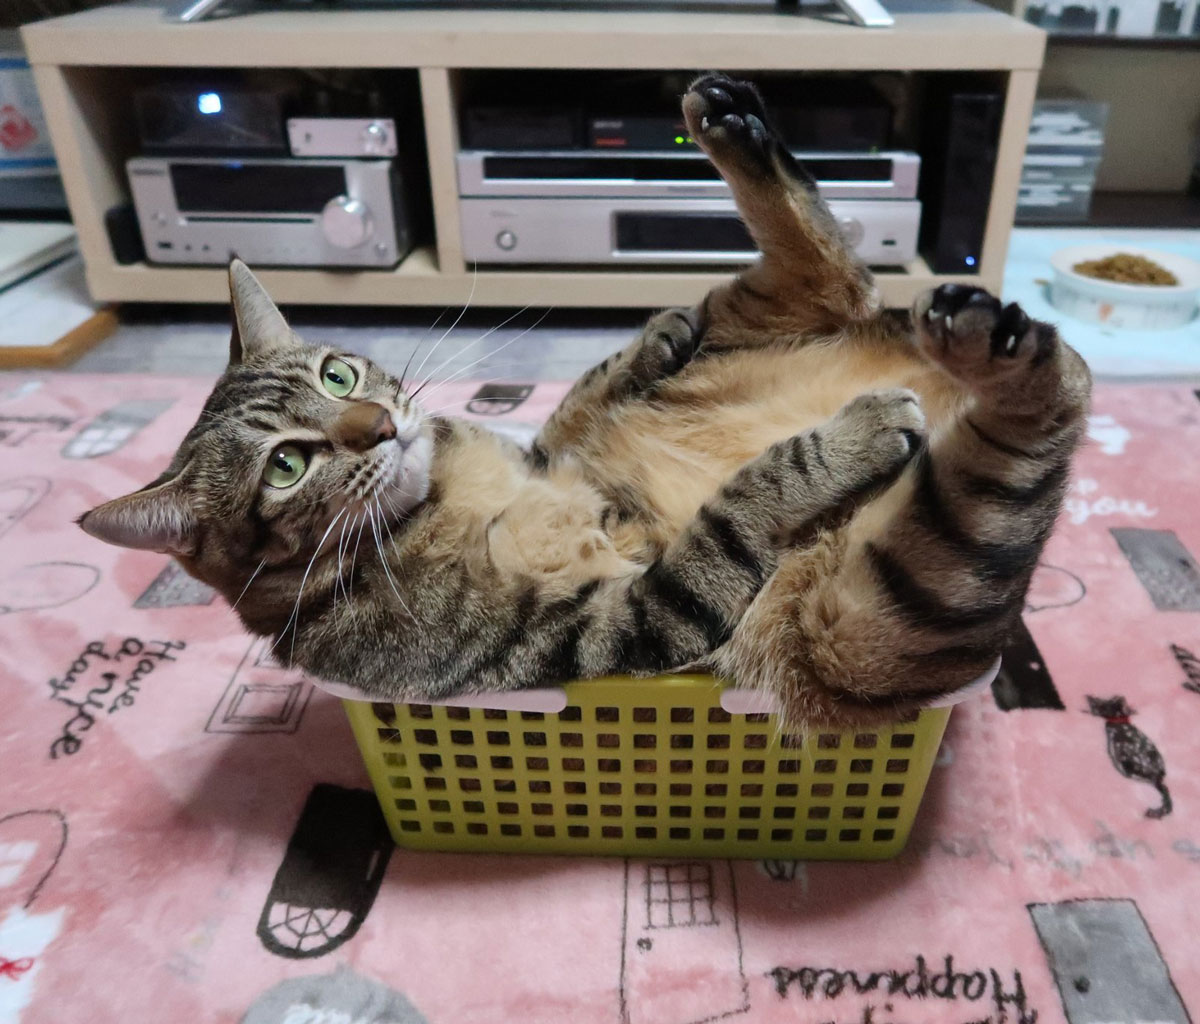 If I fits, I... do this